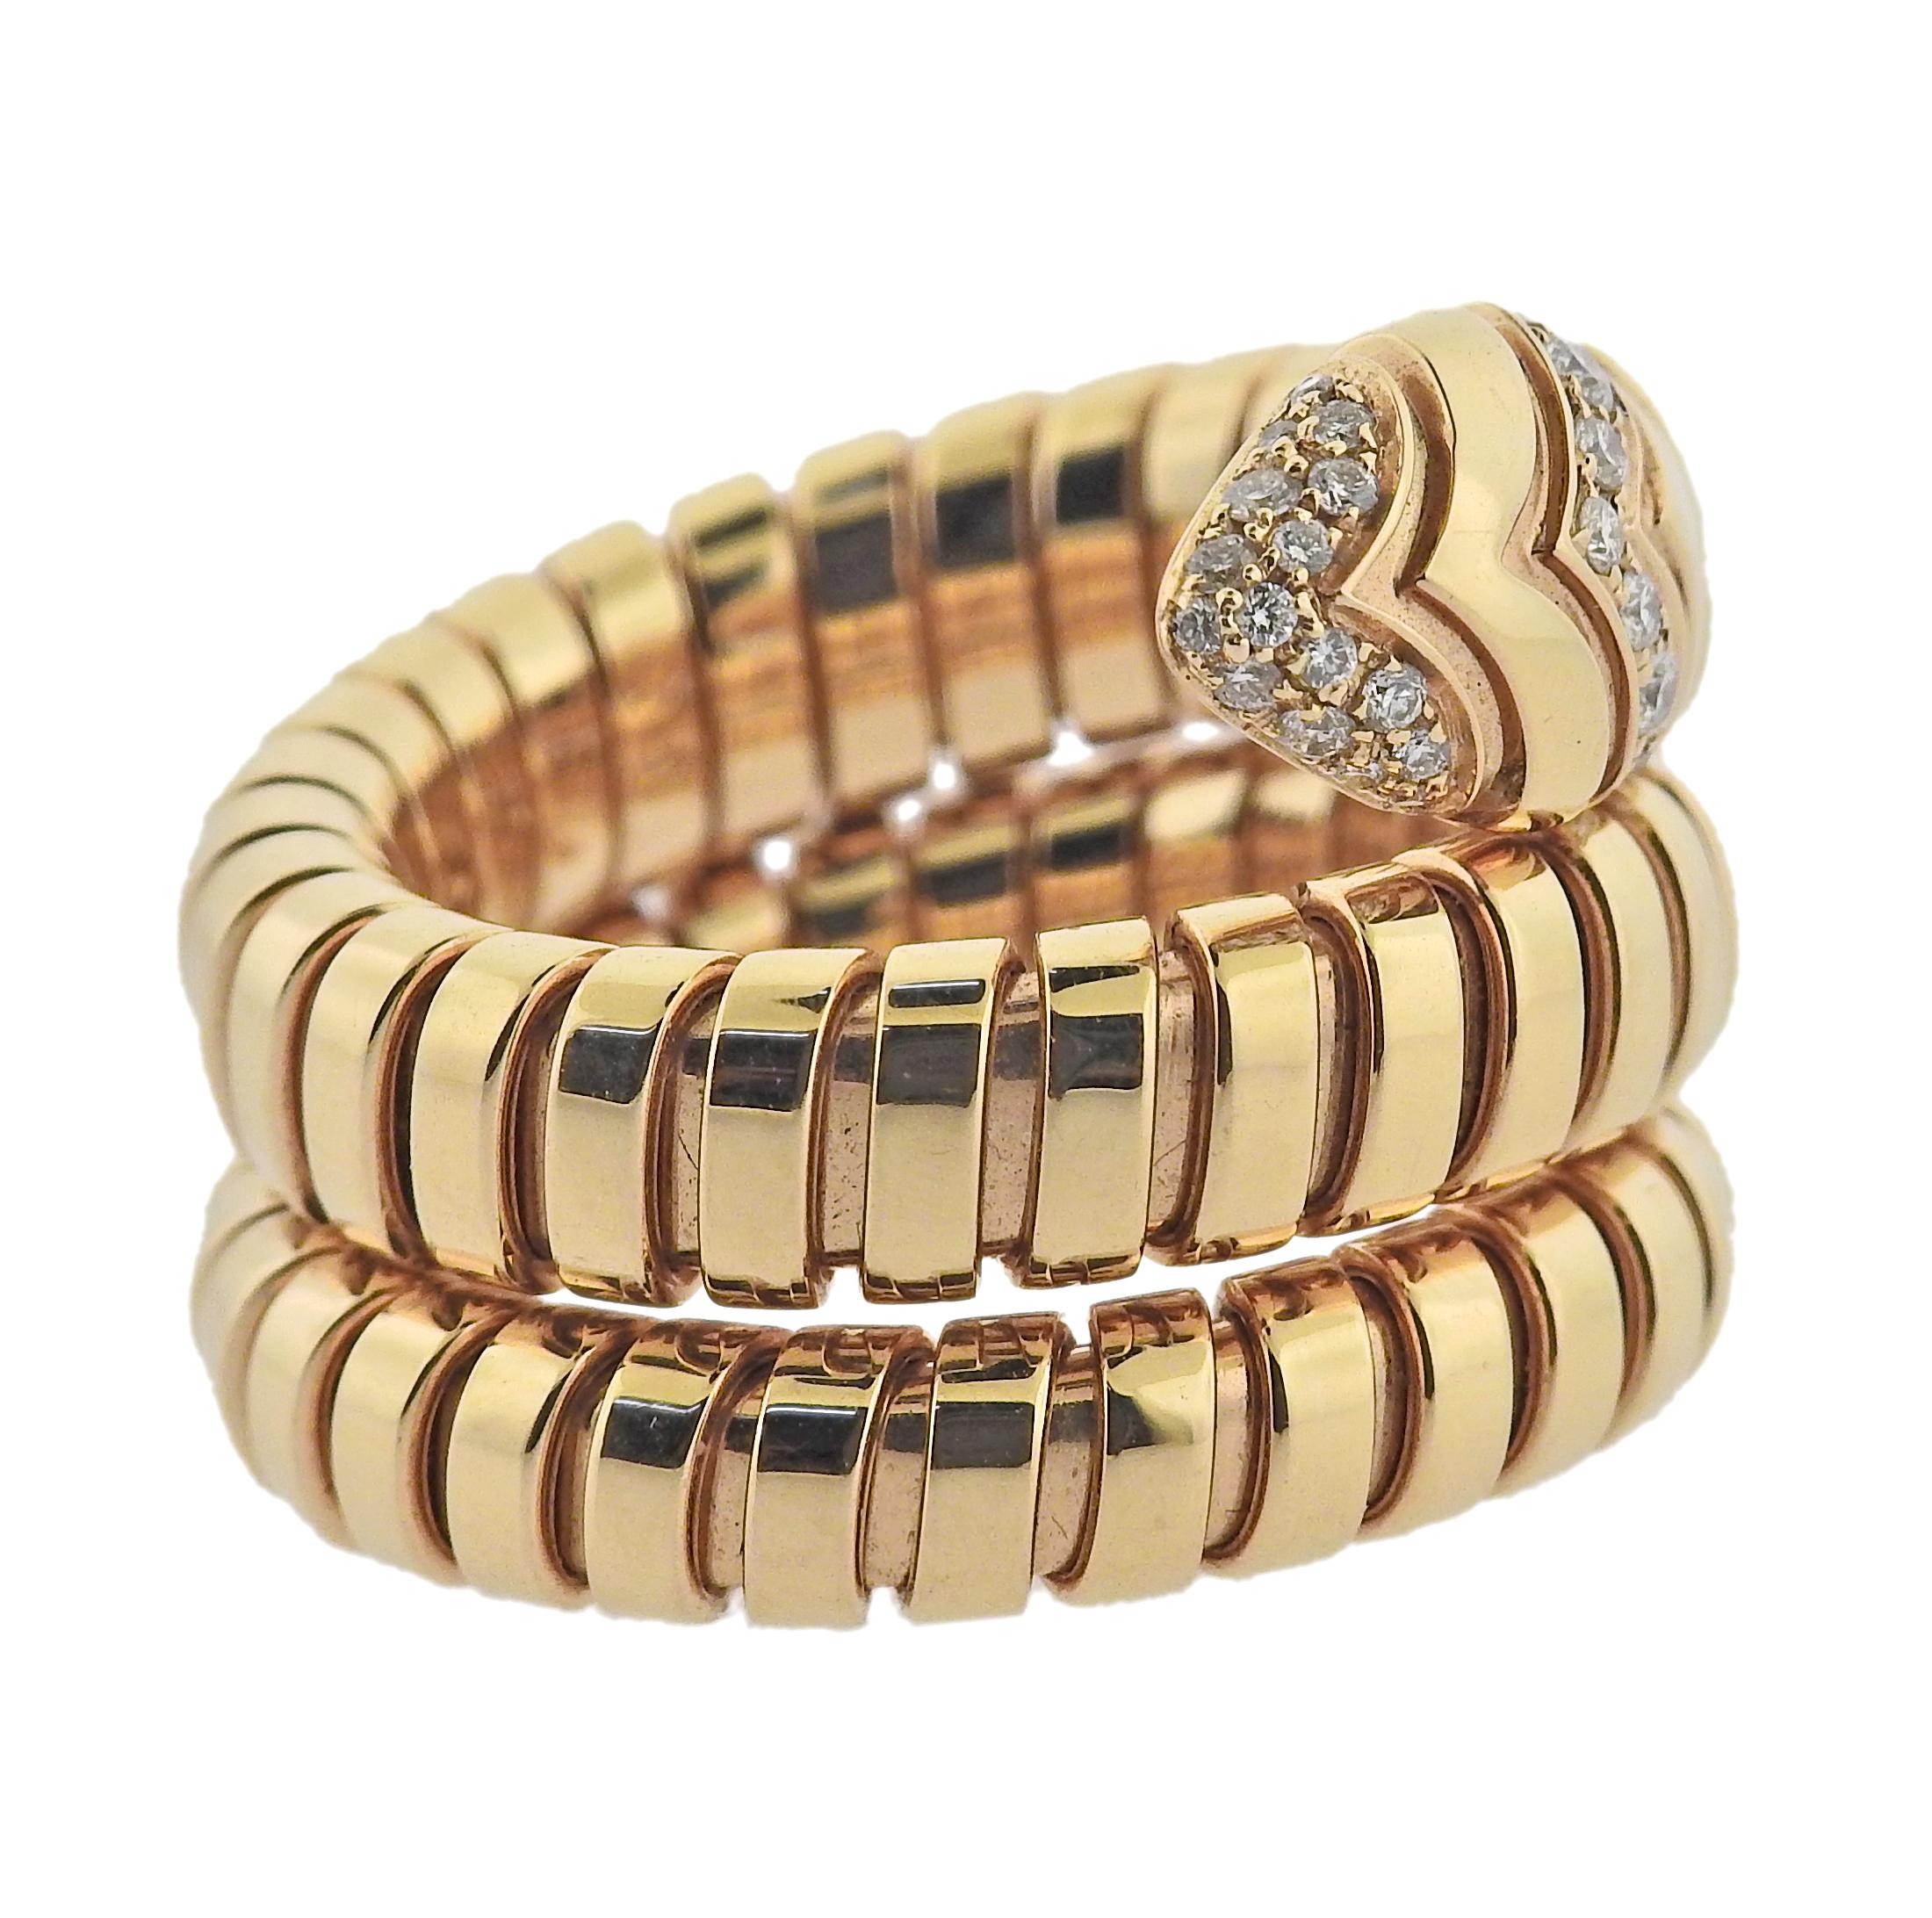 18k rose gold Bvlgari Serpenti Tubogas wrap ring, with 0.38ctw G/VS diamonds. Comes with COA and box. Ring size 6, slightly flexible. Width 18mm. Marked Bvlgari, made in Italy, Italian mark, 750, Serial number, M. Weight 19.1 grams